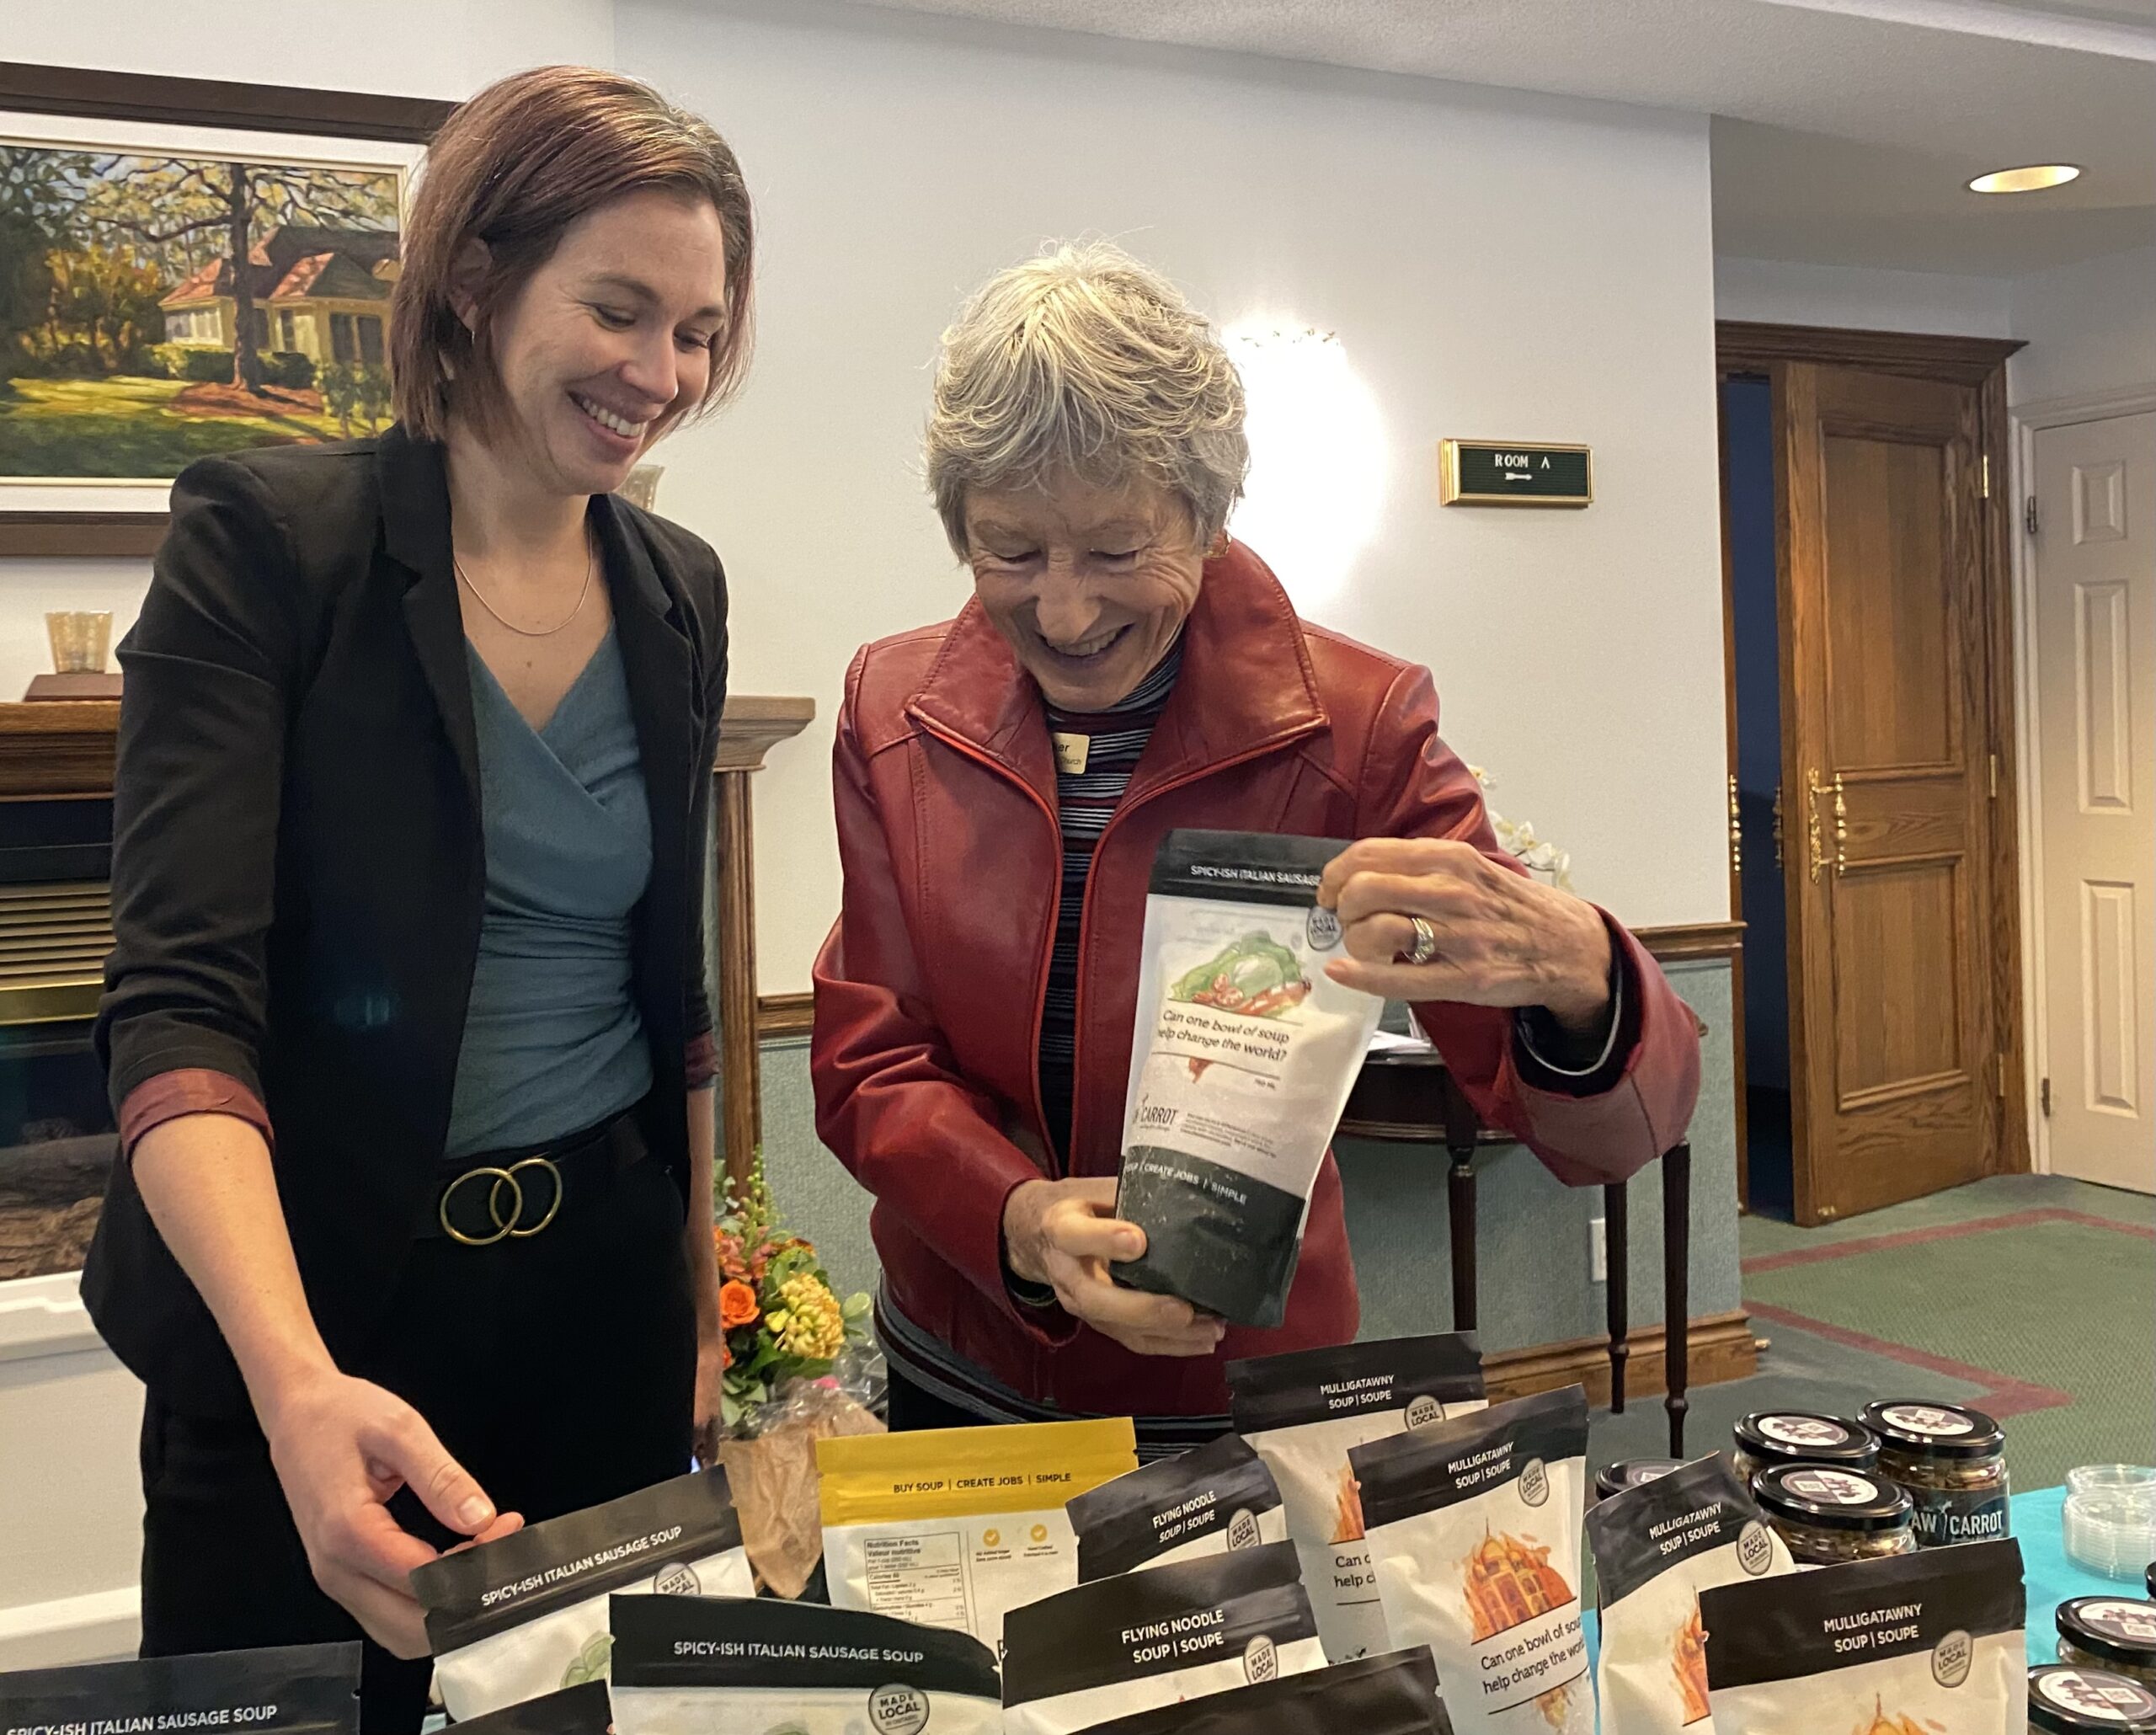 Raw Carrot community engagement manager Elena Haskell and St. Andrew's Barrie's Penny Barker restock the sales table and talk about the seasonal flavours of the heart-warming soups.